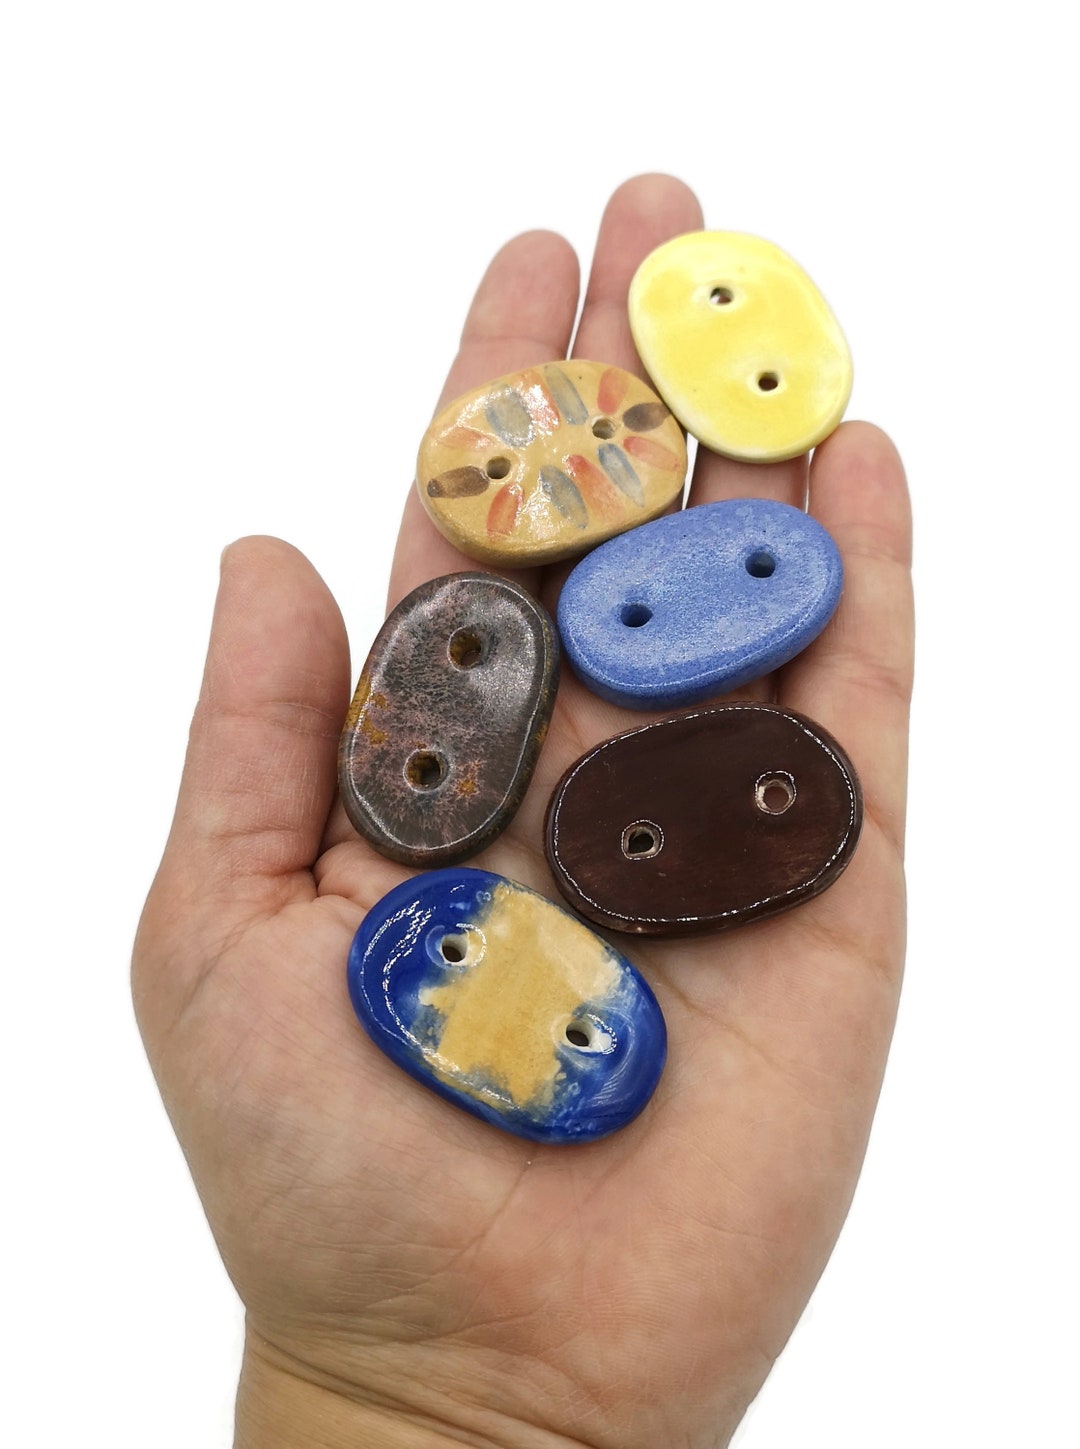 1pc 65mm Colorful Giant Sewing Buttons, Jumbo Confetti Decorative Novelty  Extra Large Buttons for Crafts, Handmade Ceramic Coat Button 